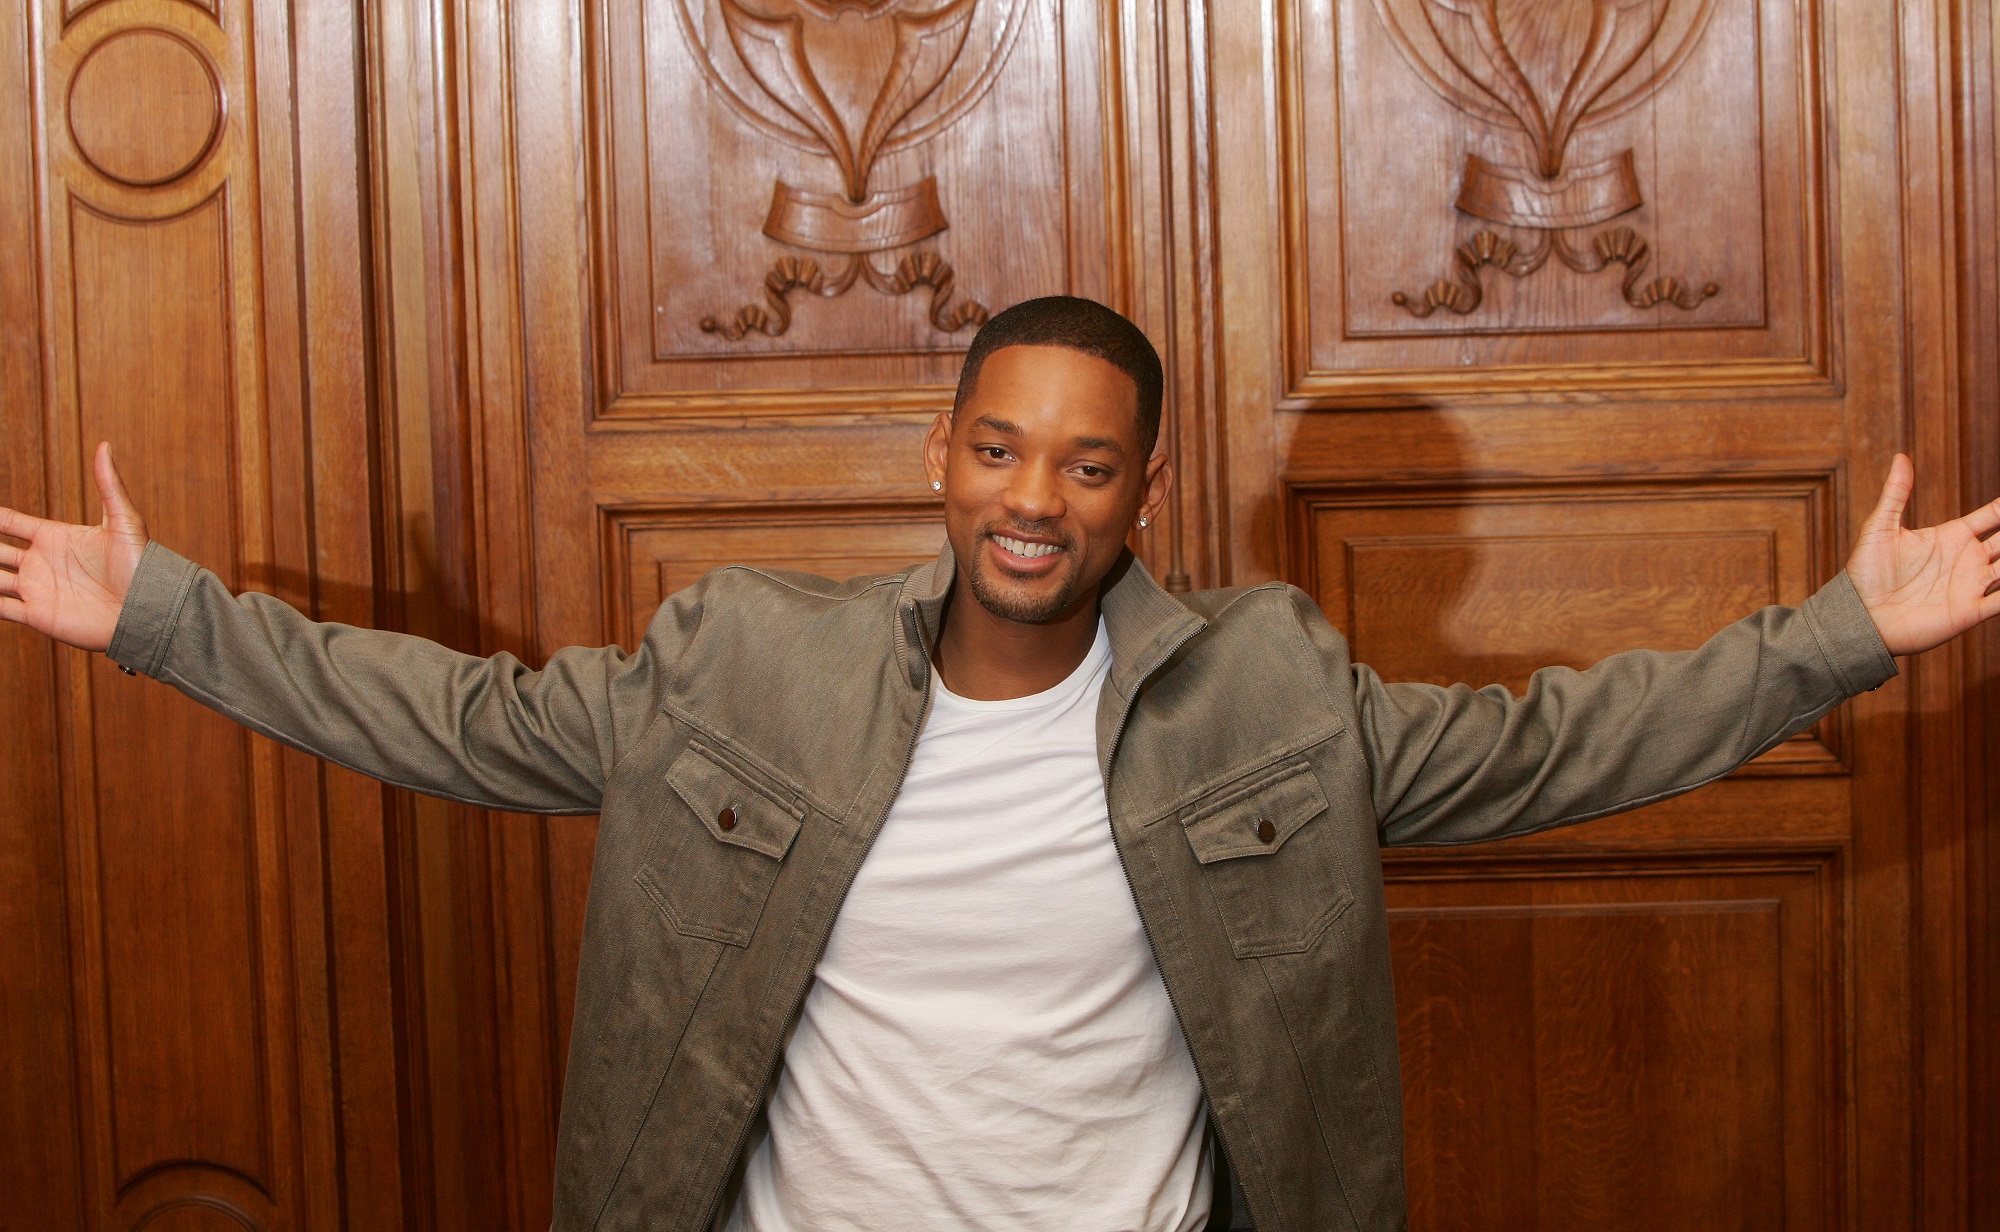 Will Smith with arms wide open